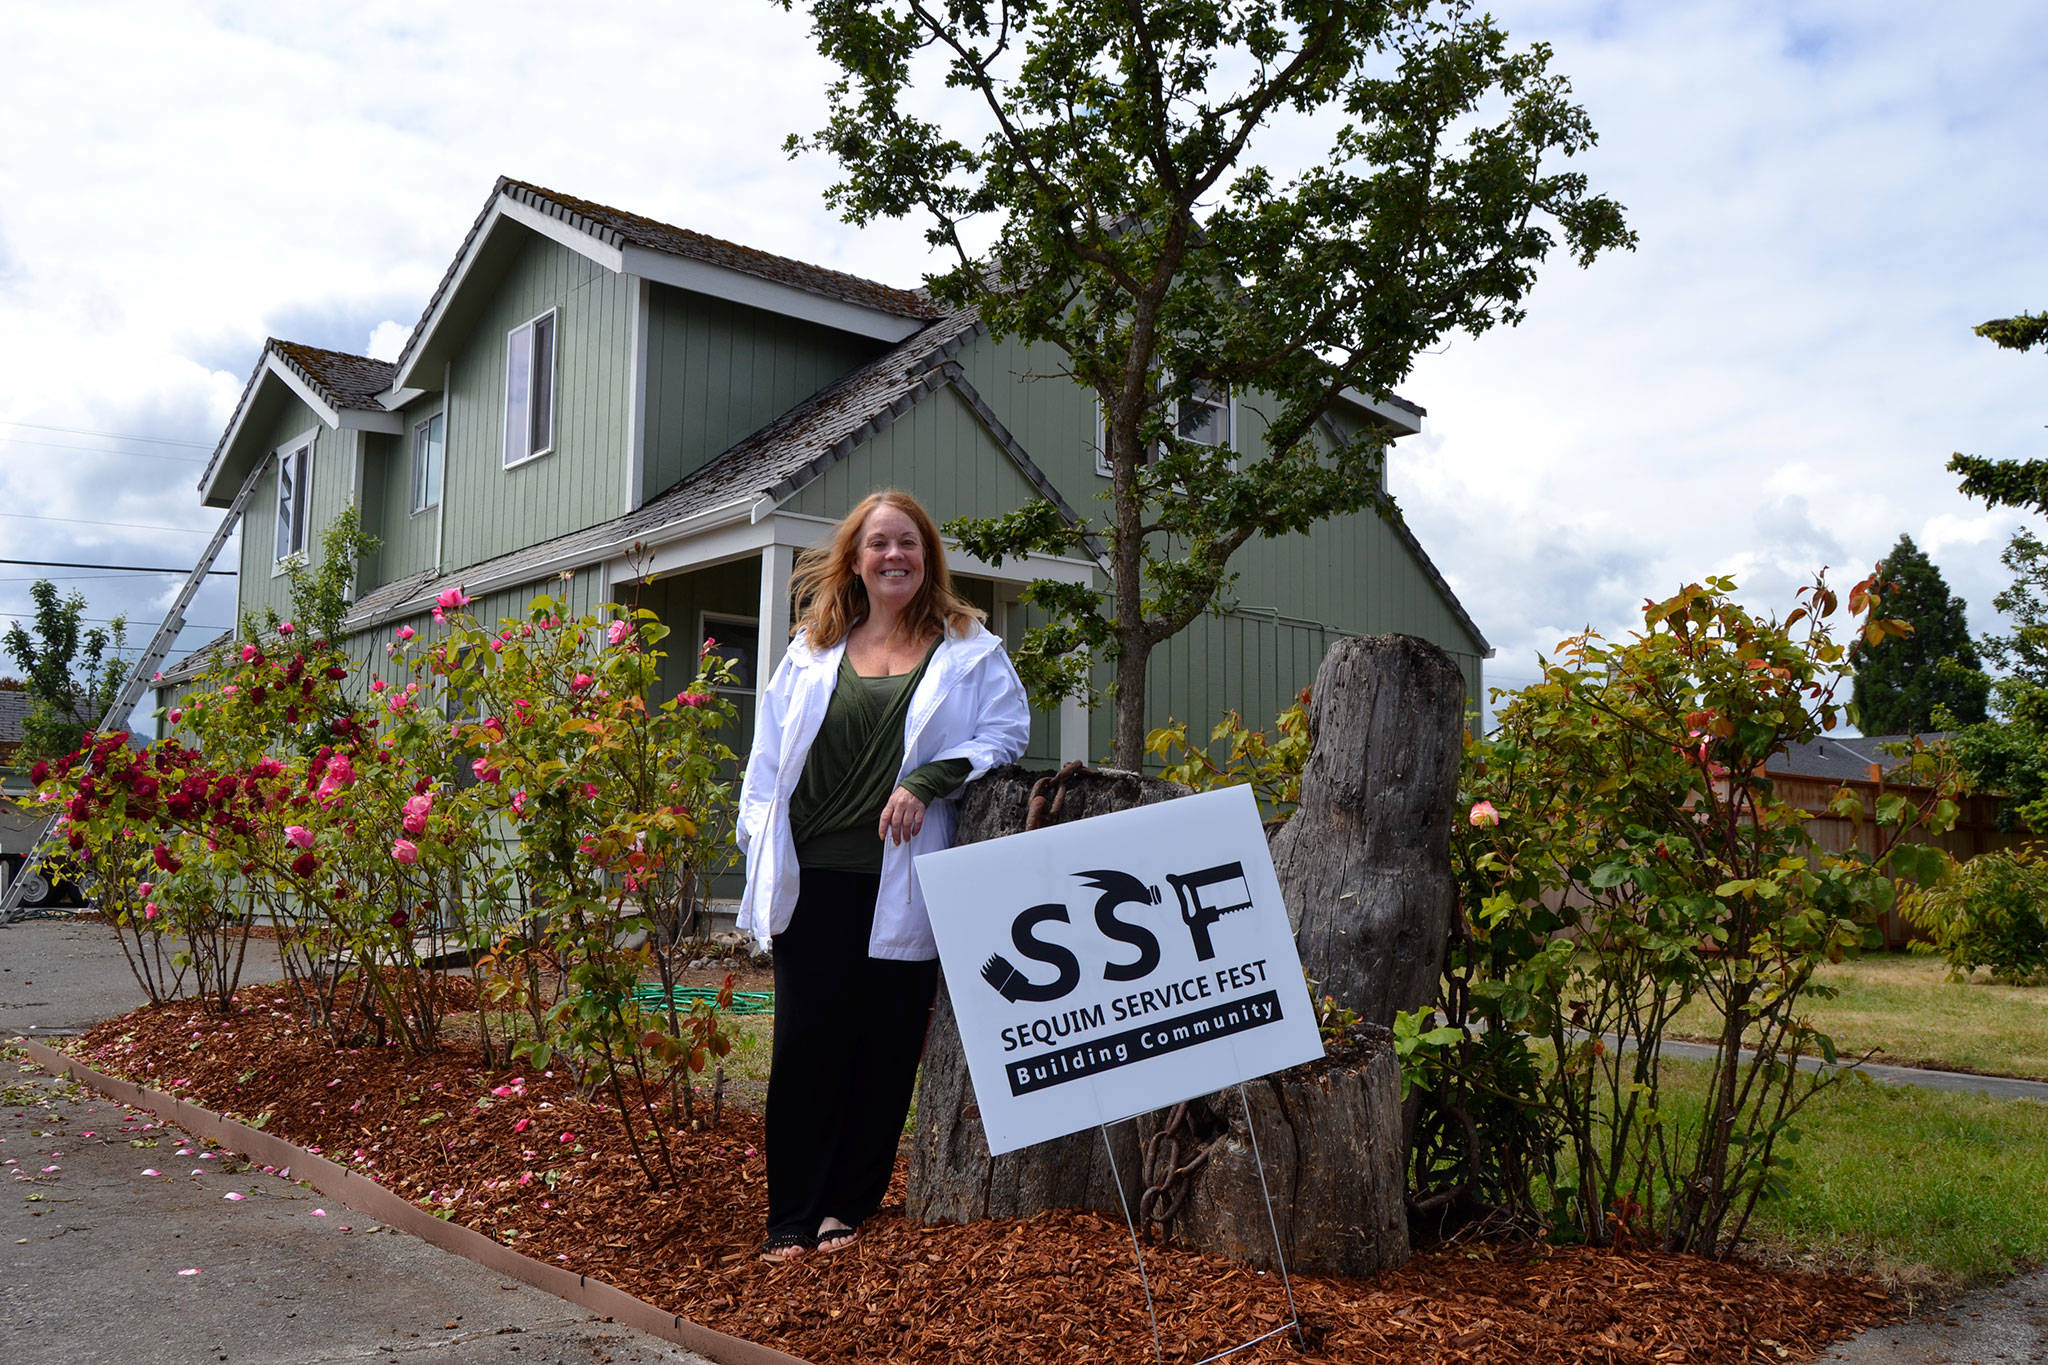 Laraine Claire stands outside her home on the corner of Spruce Street and Fourth Avenue where volunteers helped paint and revitalize her home. She said the project helped inspire hope in her. Sequim Gazette photo by Matthew Nash